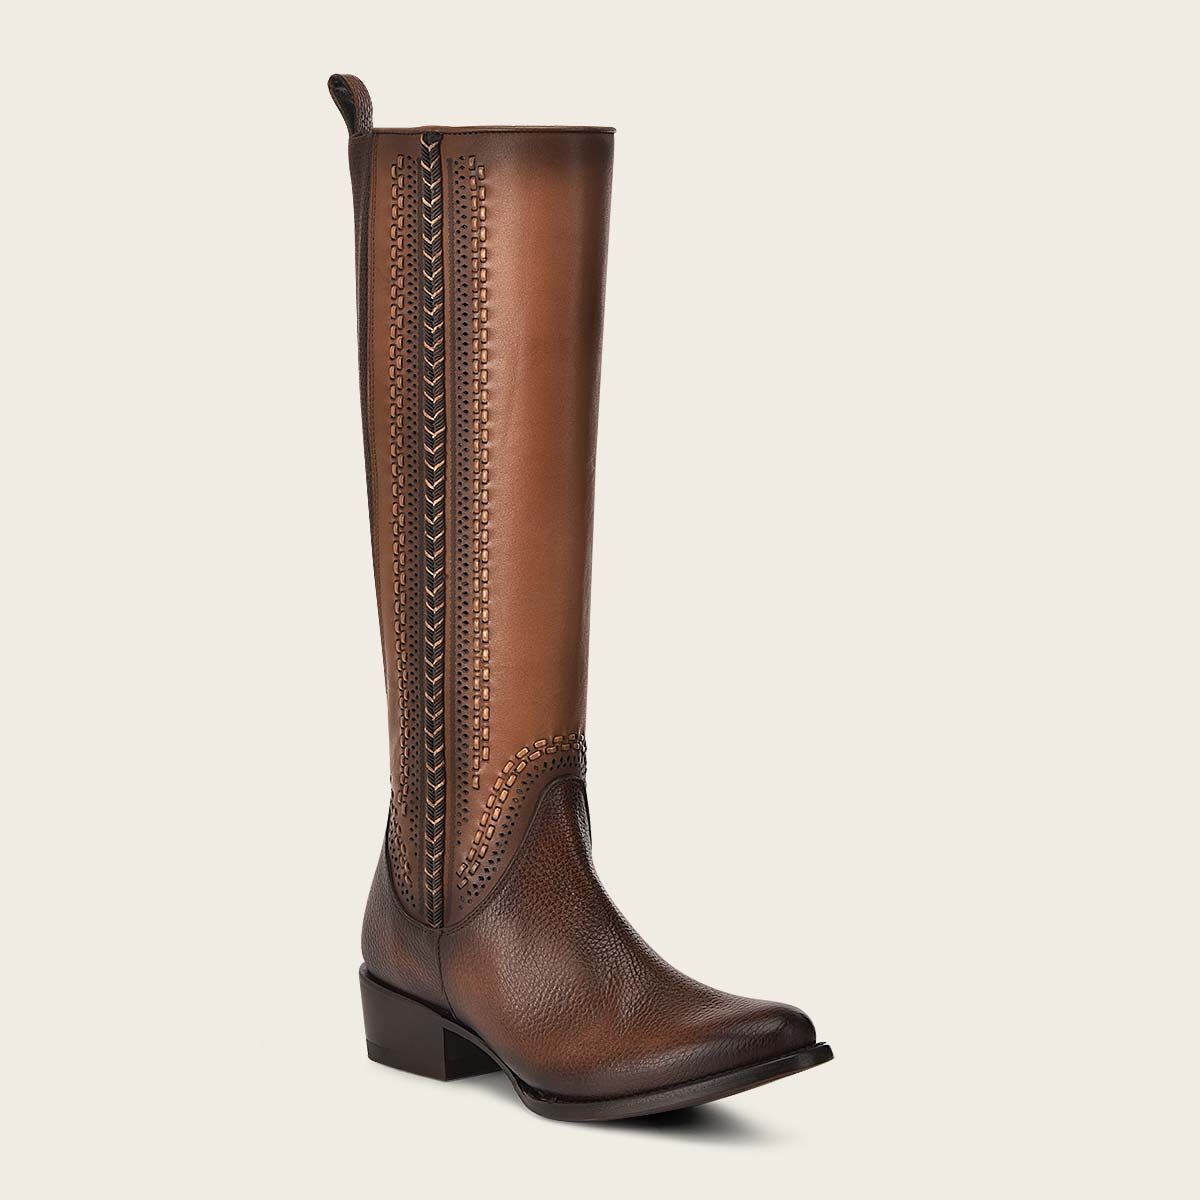 High brown boot with different textures